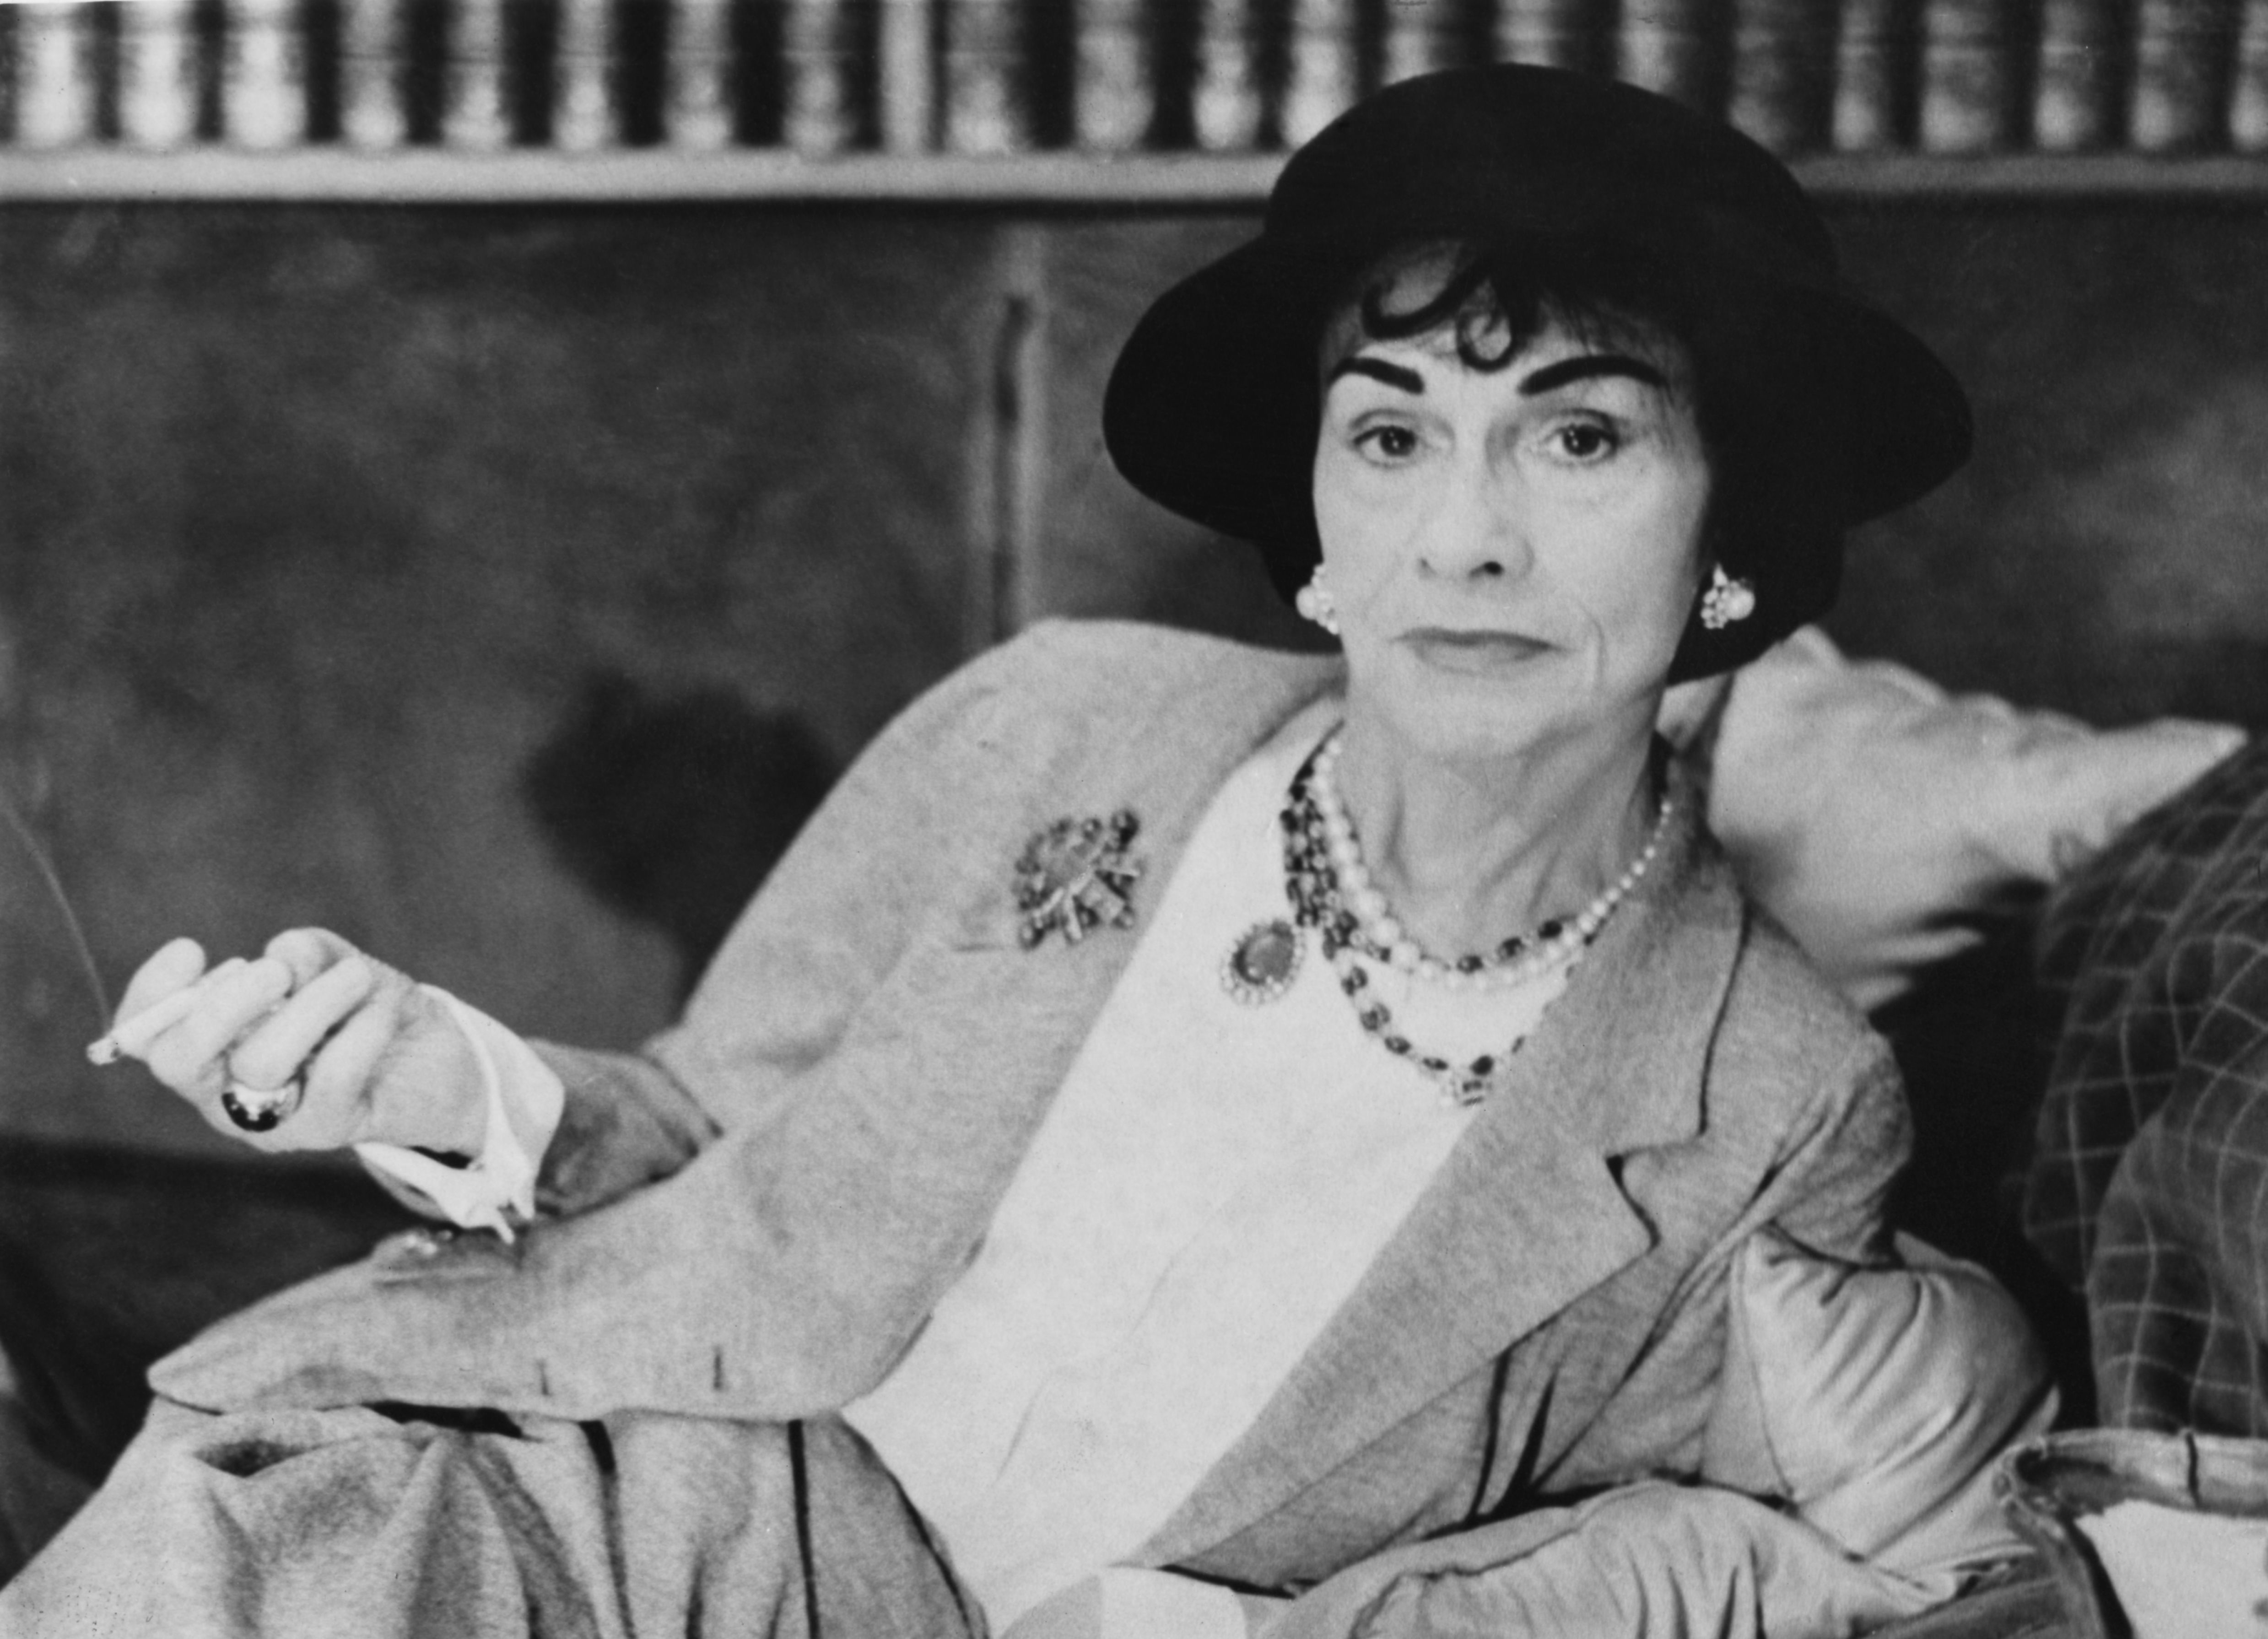 25 Coco Chanel Quotes On Love, Beauty & Power of Perfume (2023)